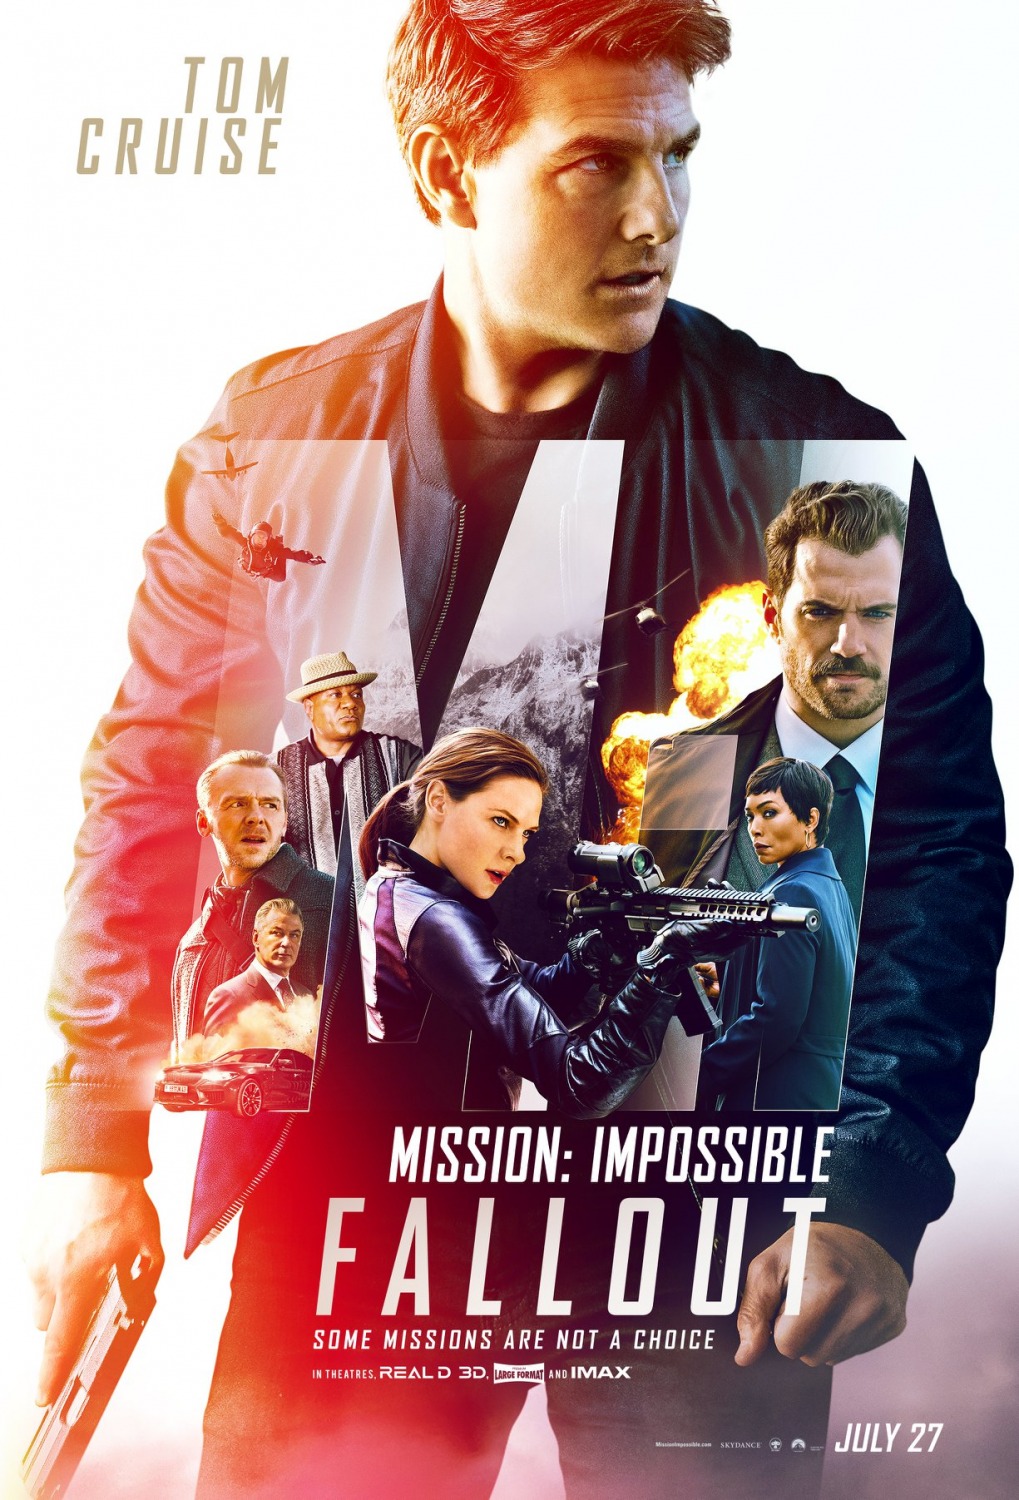 New Trailer For Mission: Impossible - Fallout - blackfilm.com/read